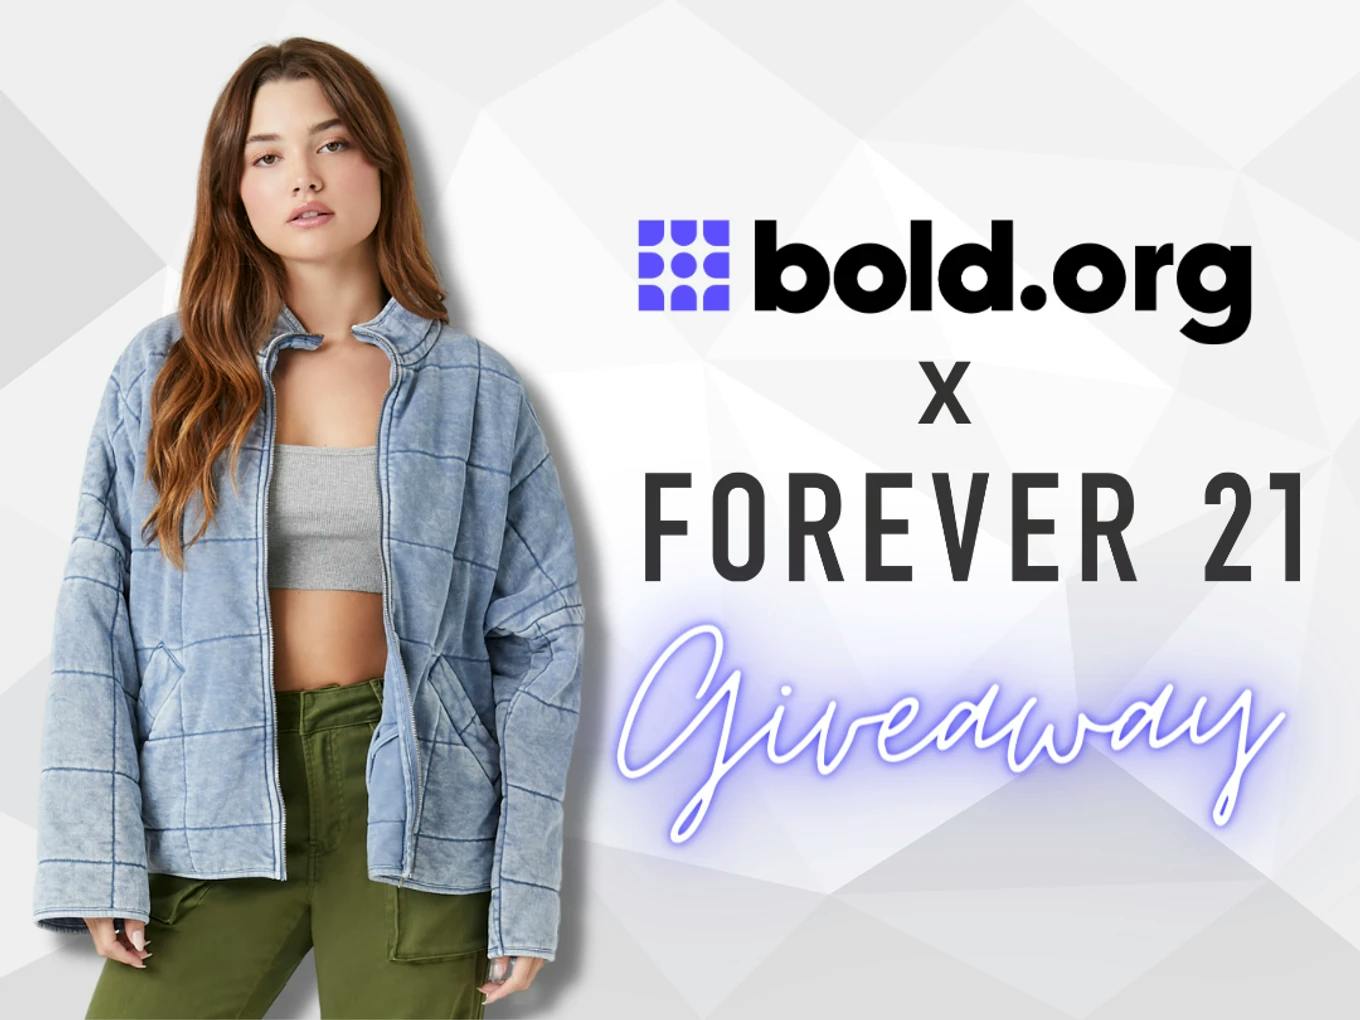 Bold.org x Forever 21 Scholarship + Giveaway